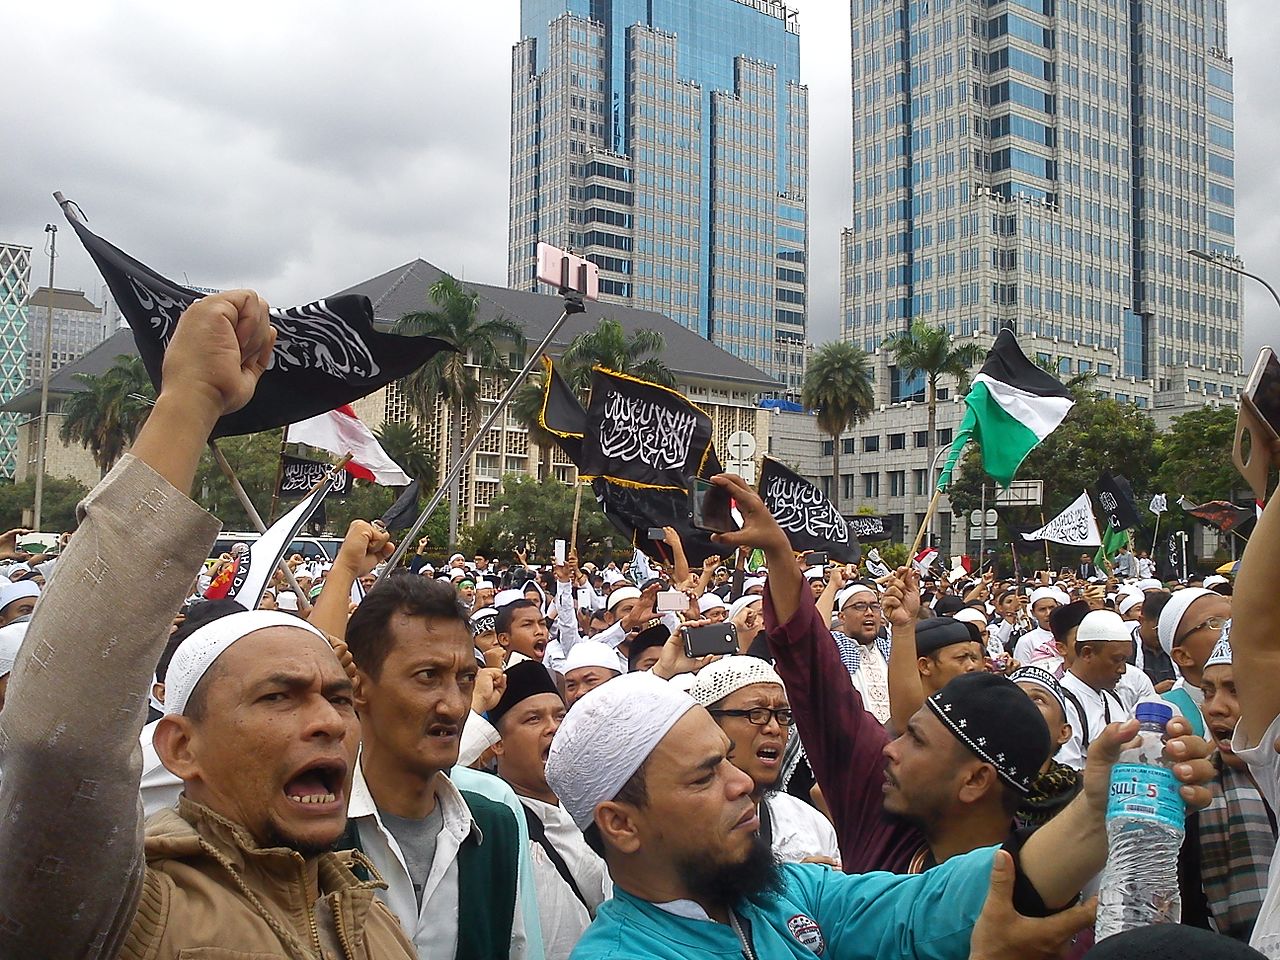 Another protester at Aksi Bela Islam 313